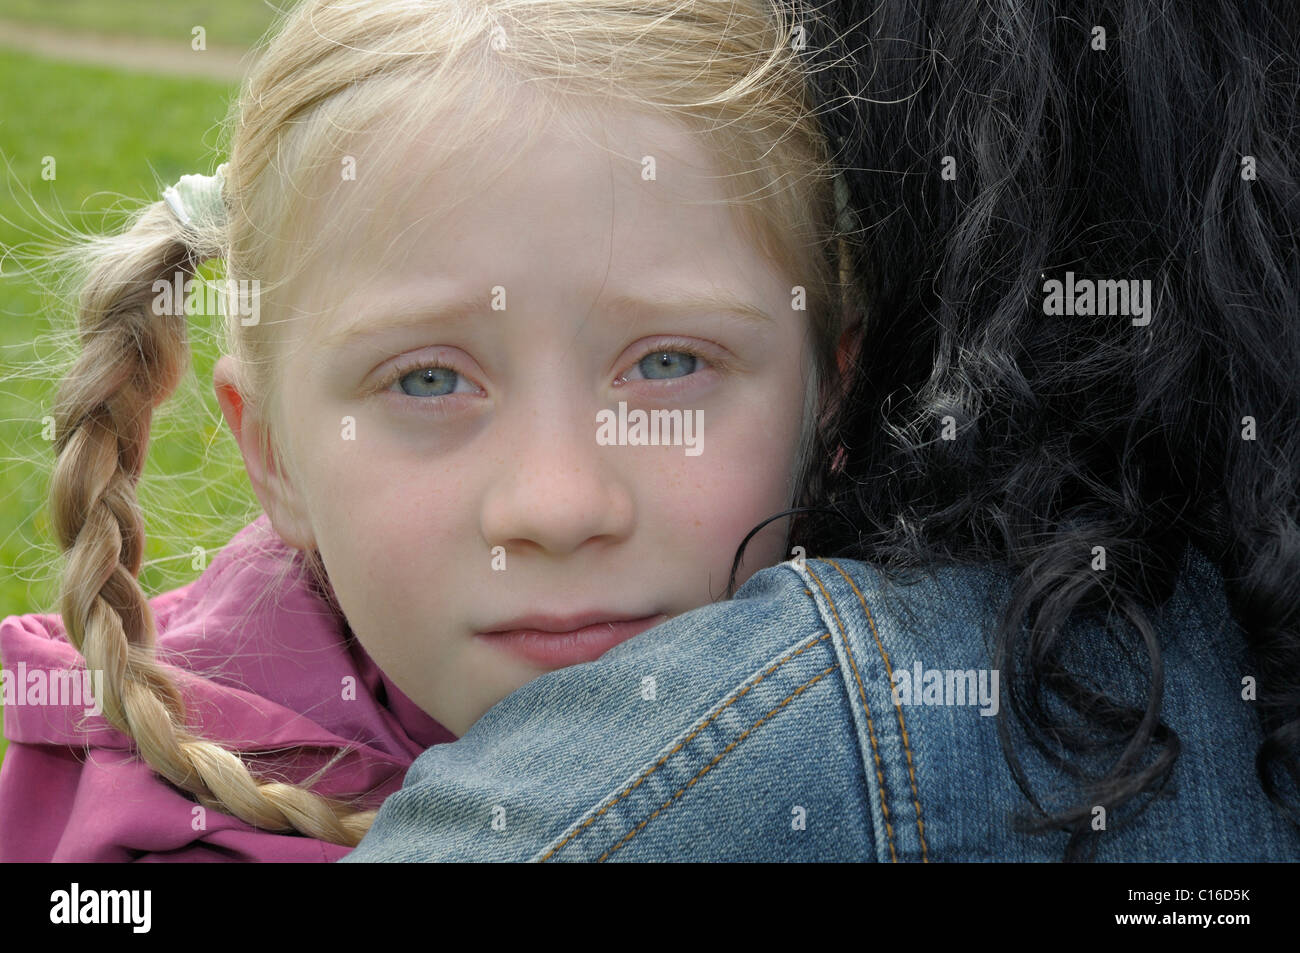 8-year-old girl, portrait Stock Photo